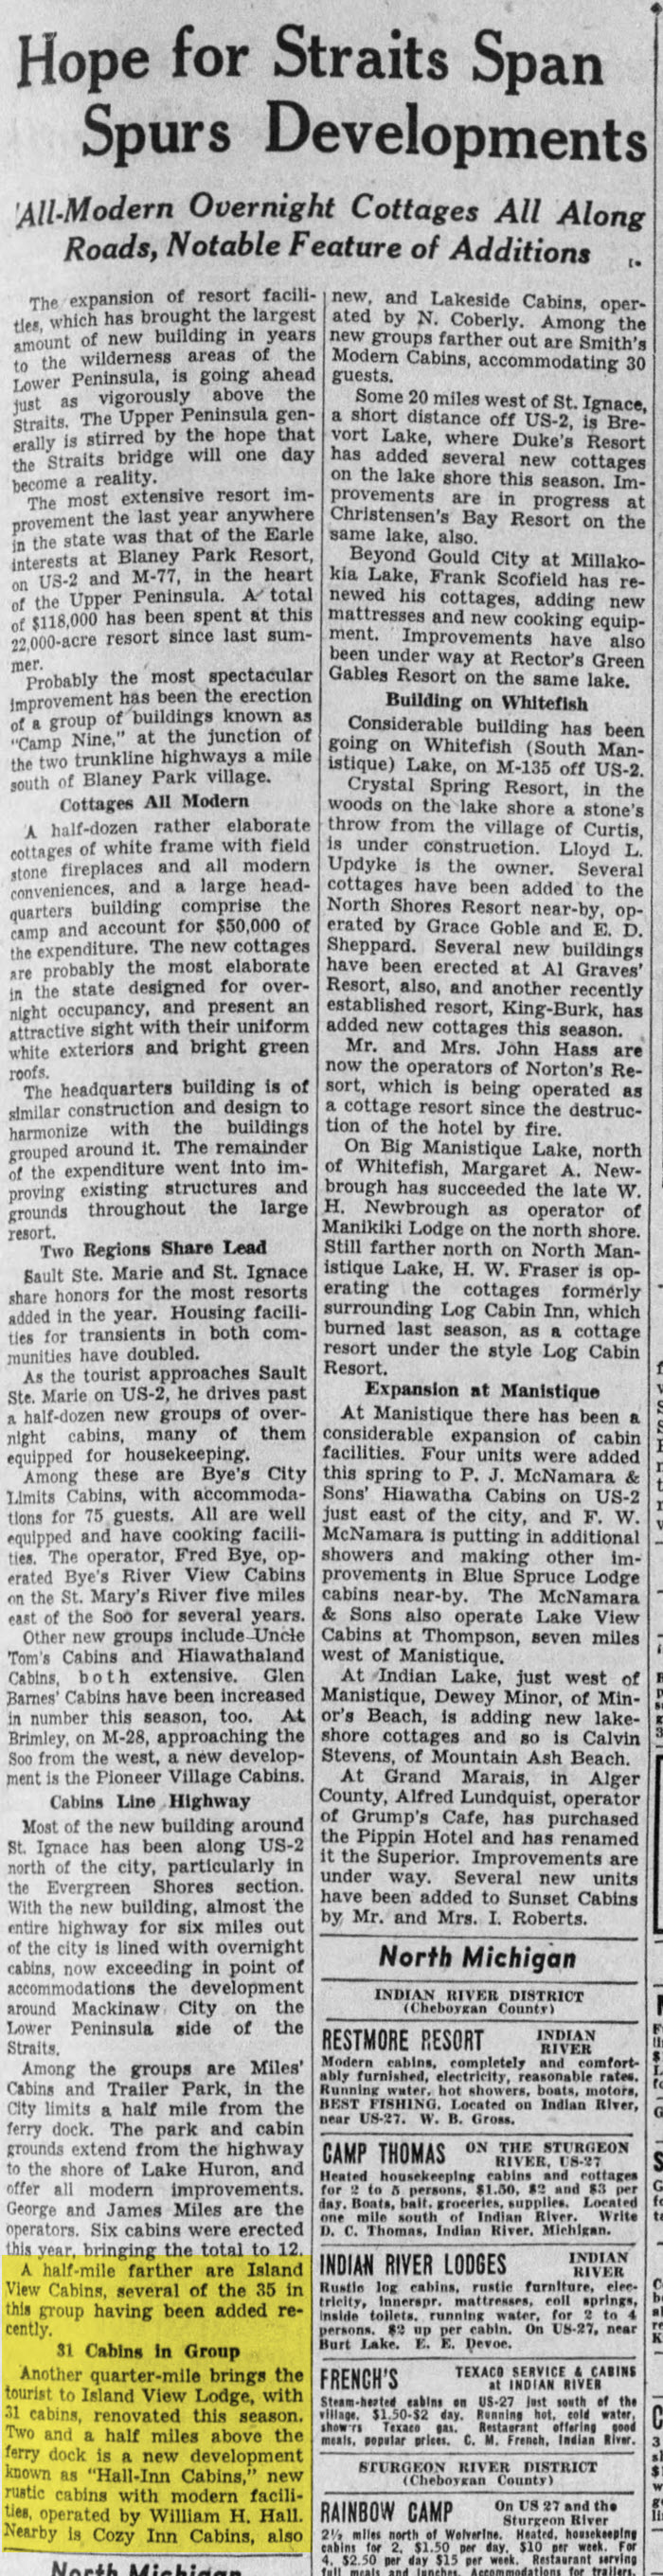 Chalet North Motel (Island View Lodge Motel) - June 18 1939 Article